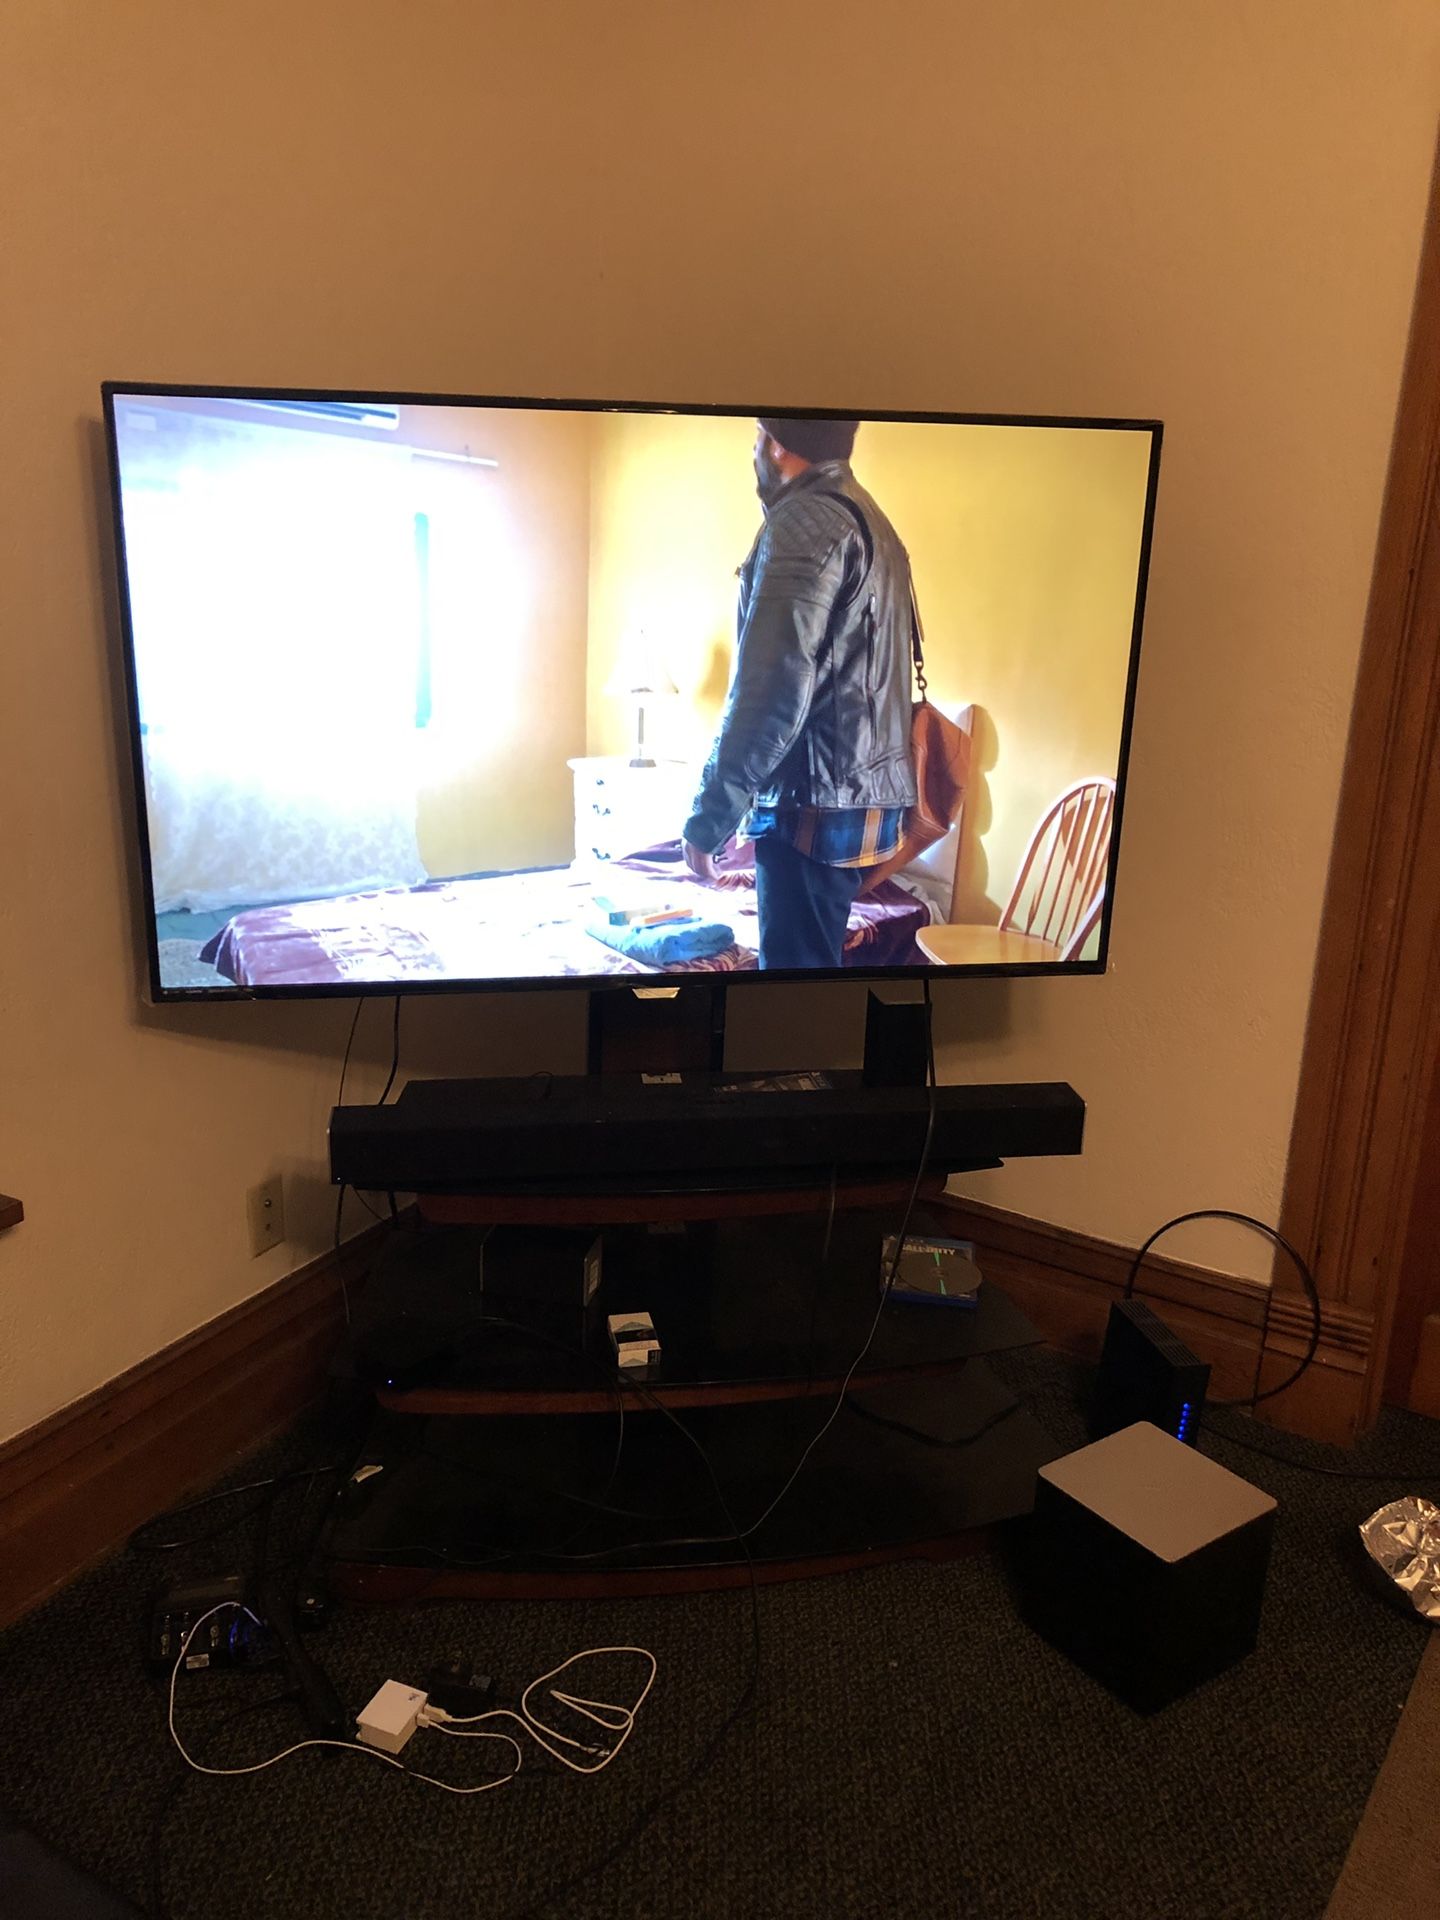 55 inch Philips Smart TV with VIZIO sound bar system and a TV Stand